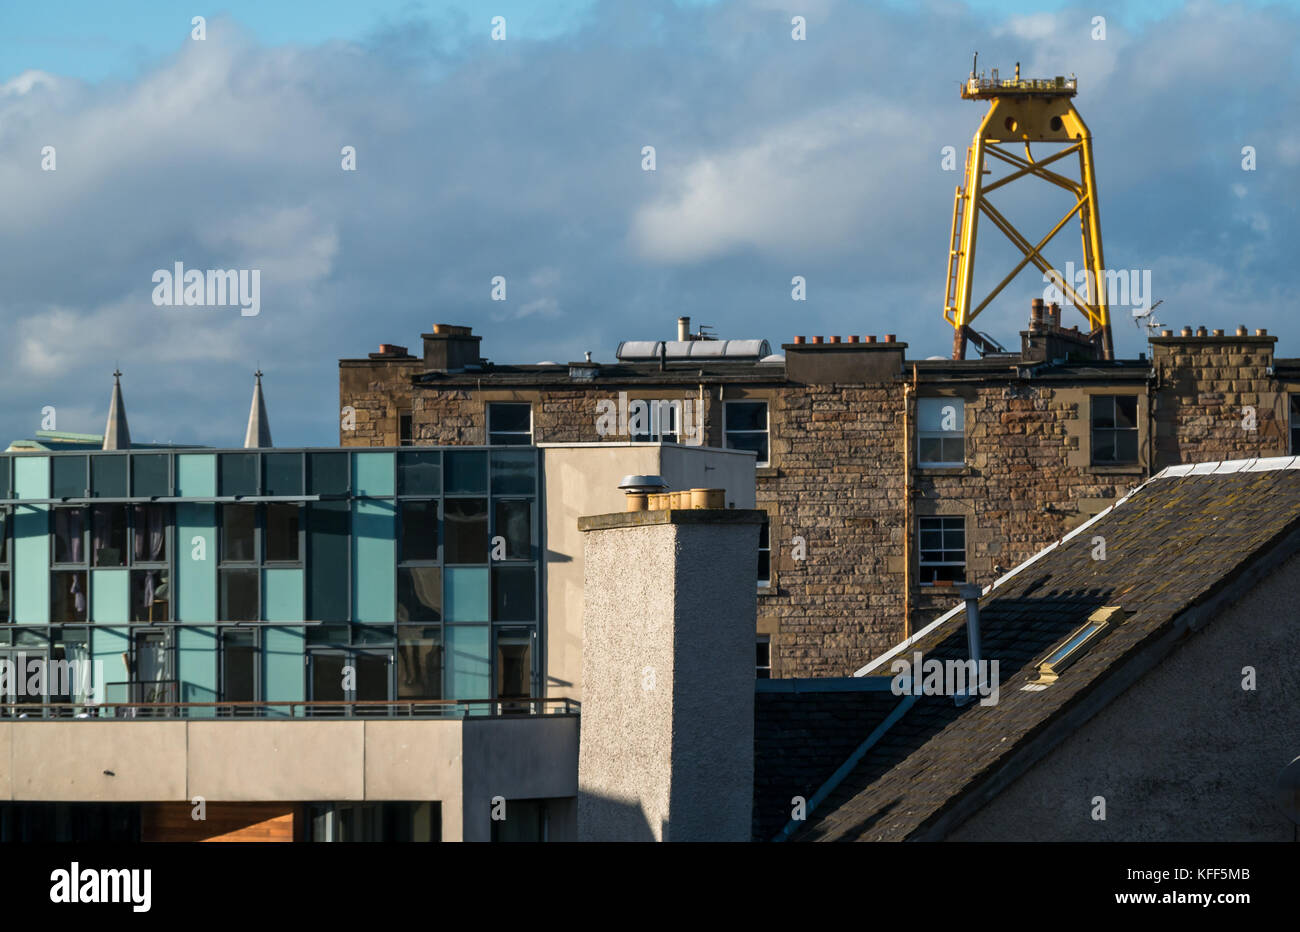 View over rooftops of old and modern buildings in Leith, Edinburgh, Scotland, UK, with huge yellow wind turbine platform in distance Stock Photo